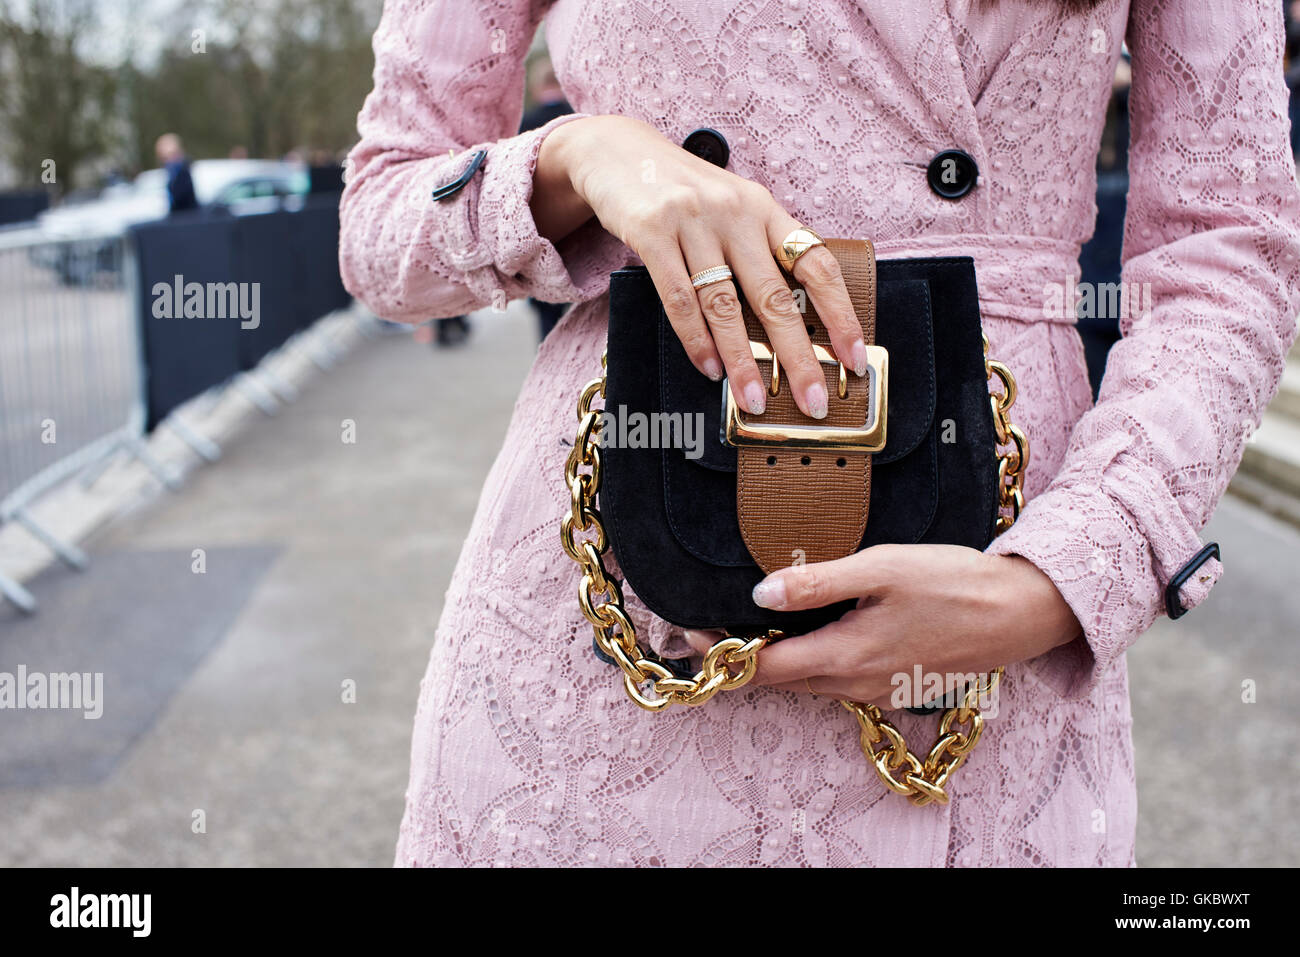 Mid section crop of woman in a pink coat holding a handbag Stock Photo